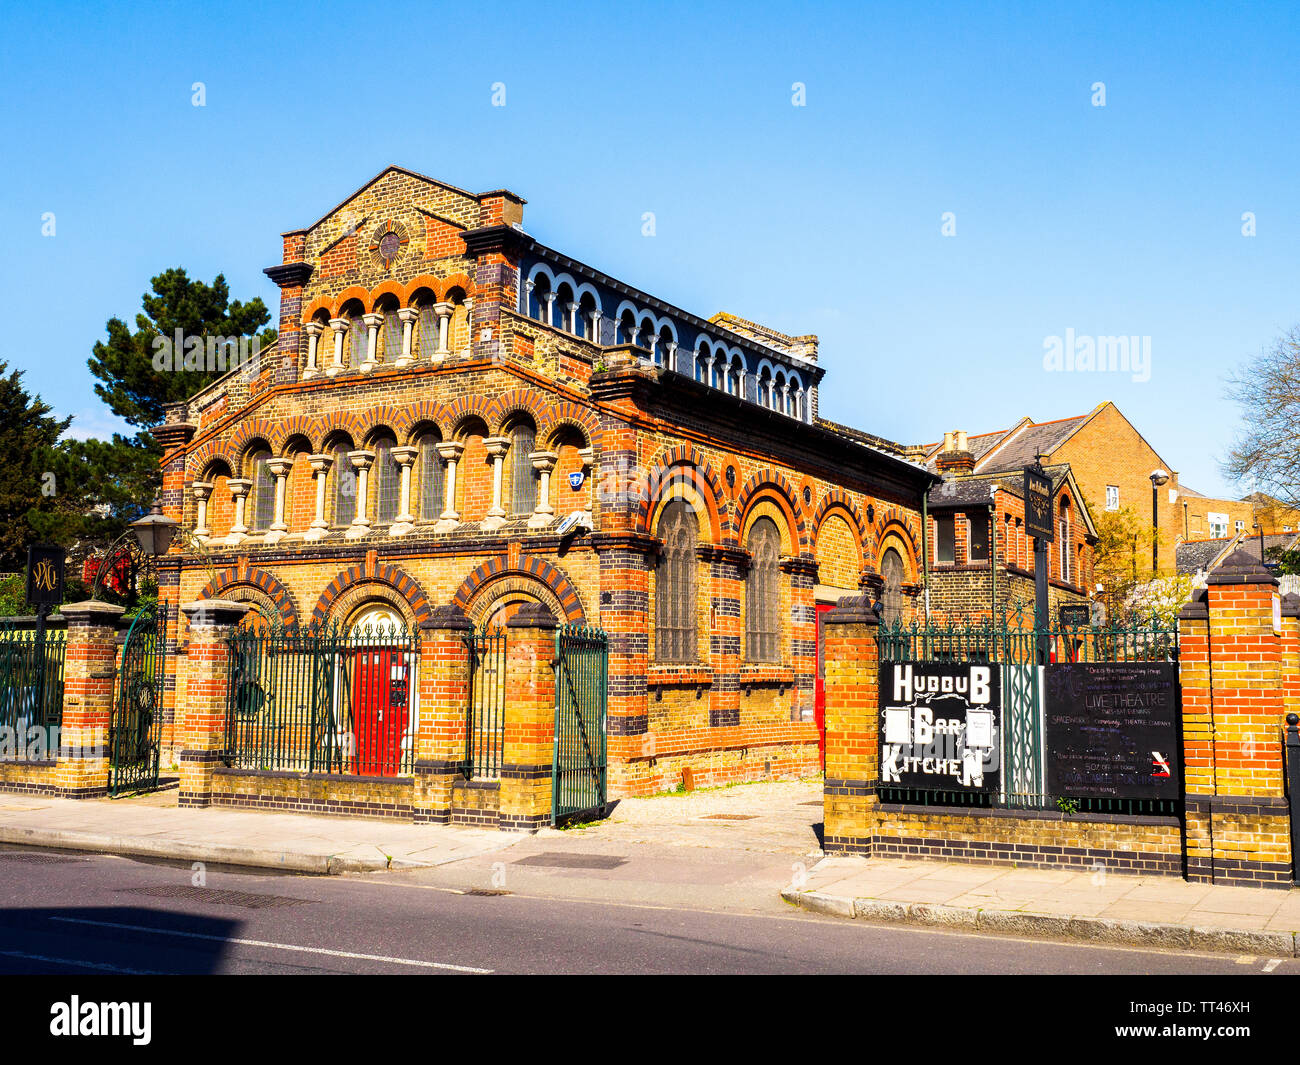 The Space - Performing arts theatre Isle of Dogs, London Theatre and community performance centre in a former church with a cafe/bar and acting workshops. Stock Photo